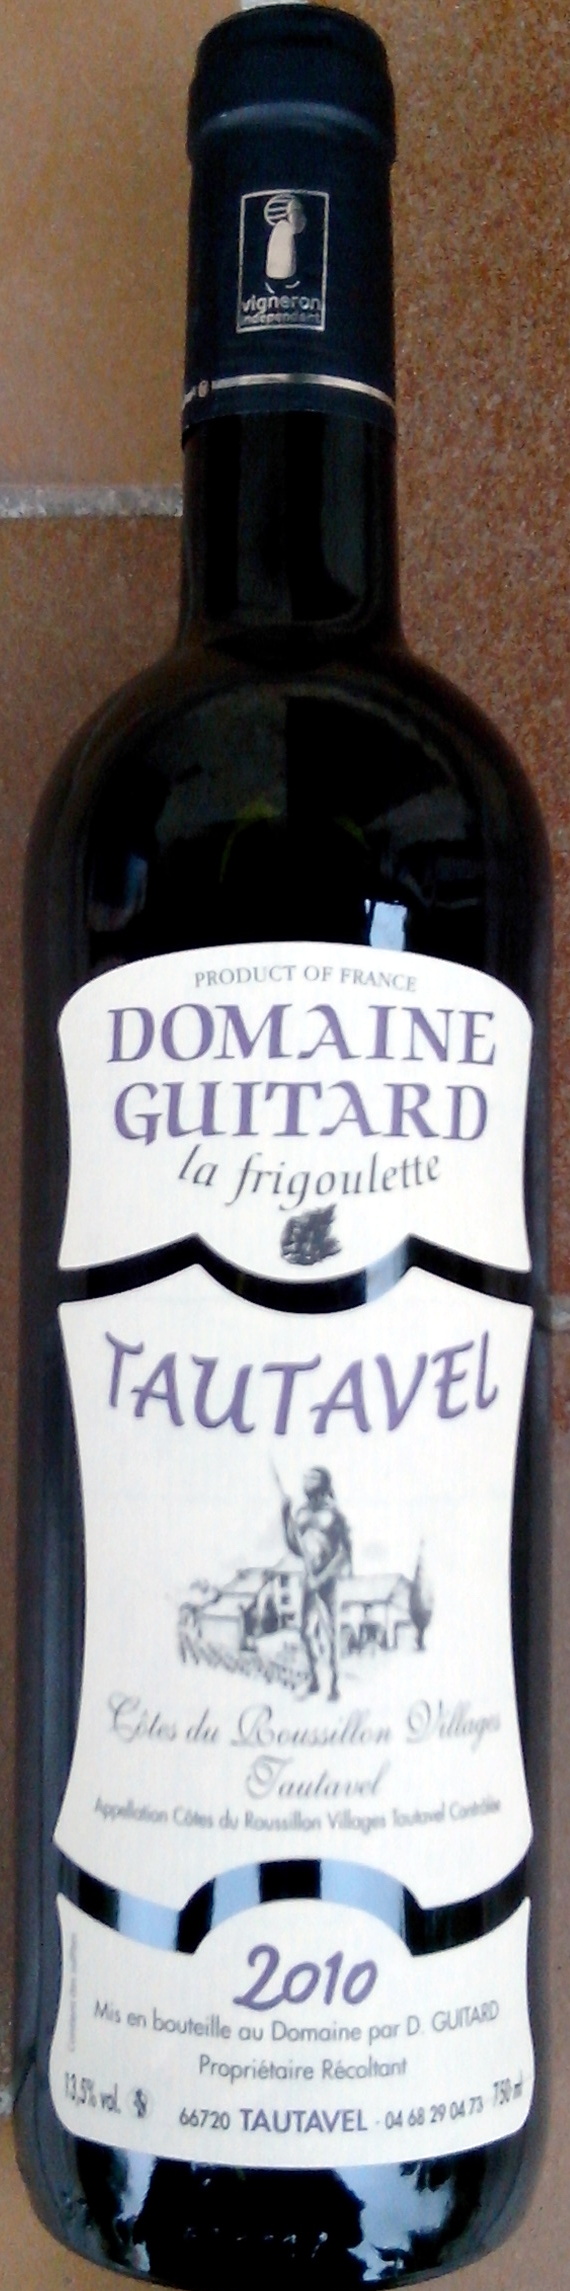 Tautavel 2010 Domaine Guitard - Product - fr